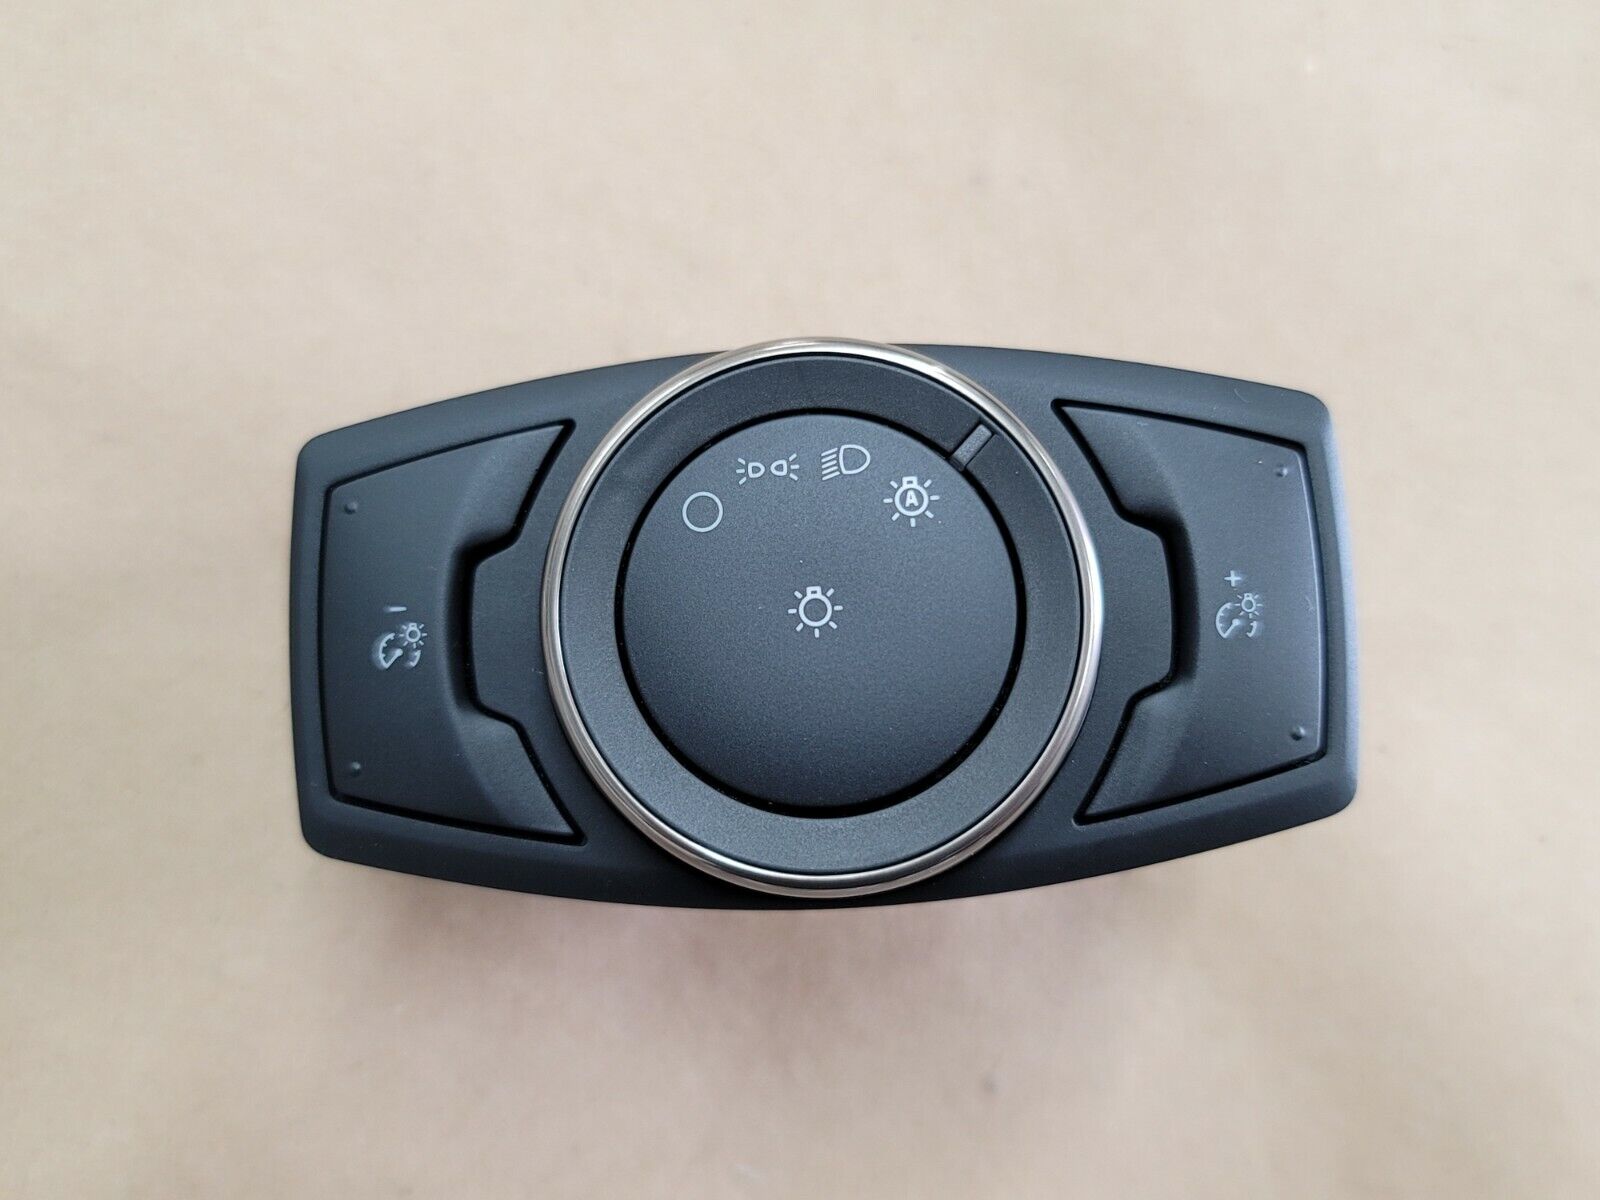 2020 Mustang Shelby GT500 Head light switch knob